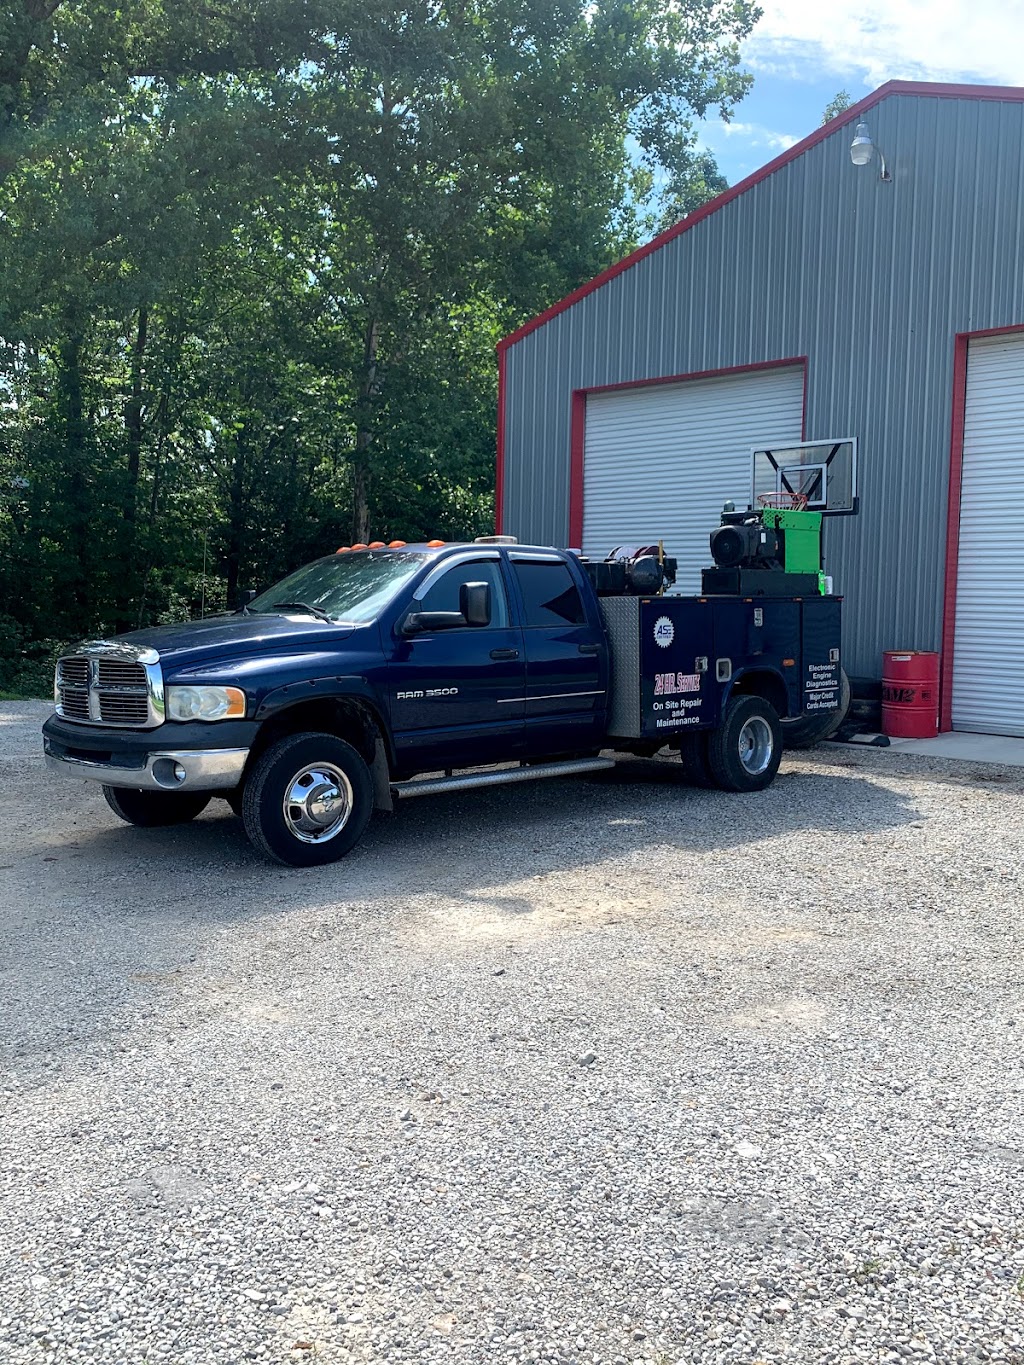 460 truck parts, repair, towing and roadside service. | 10875 Main St, Jeffersonville, KY 40337, USA | Phone: (606) 359-1379